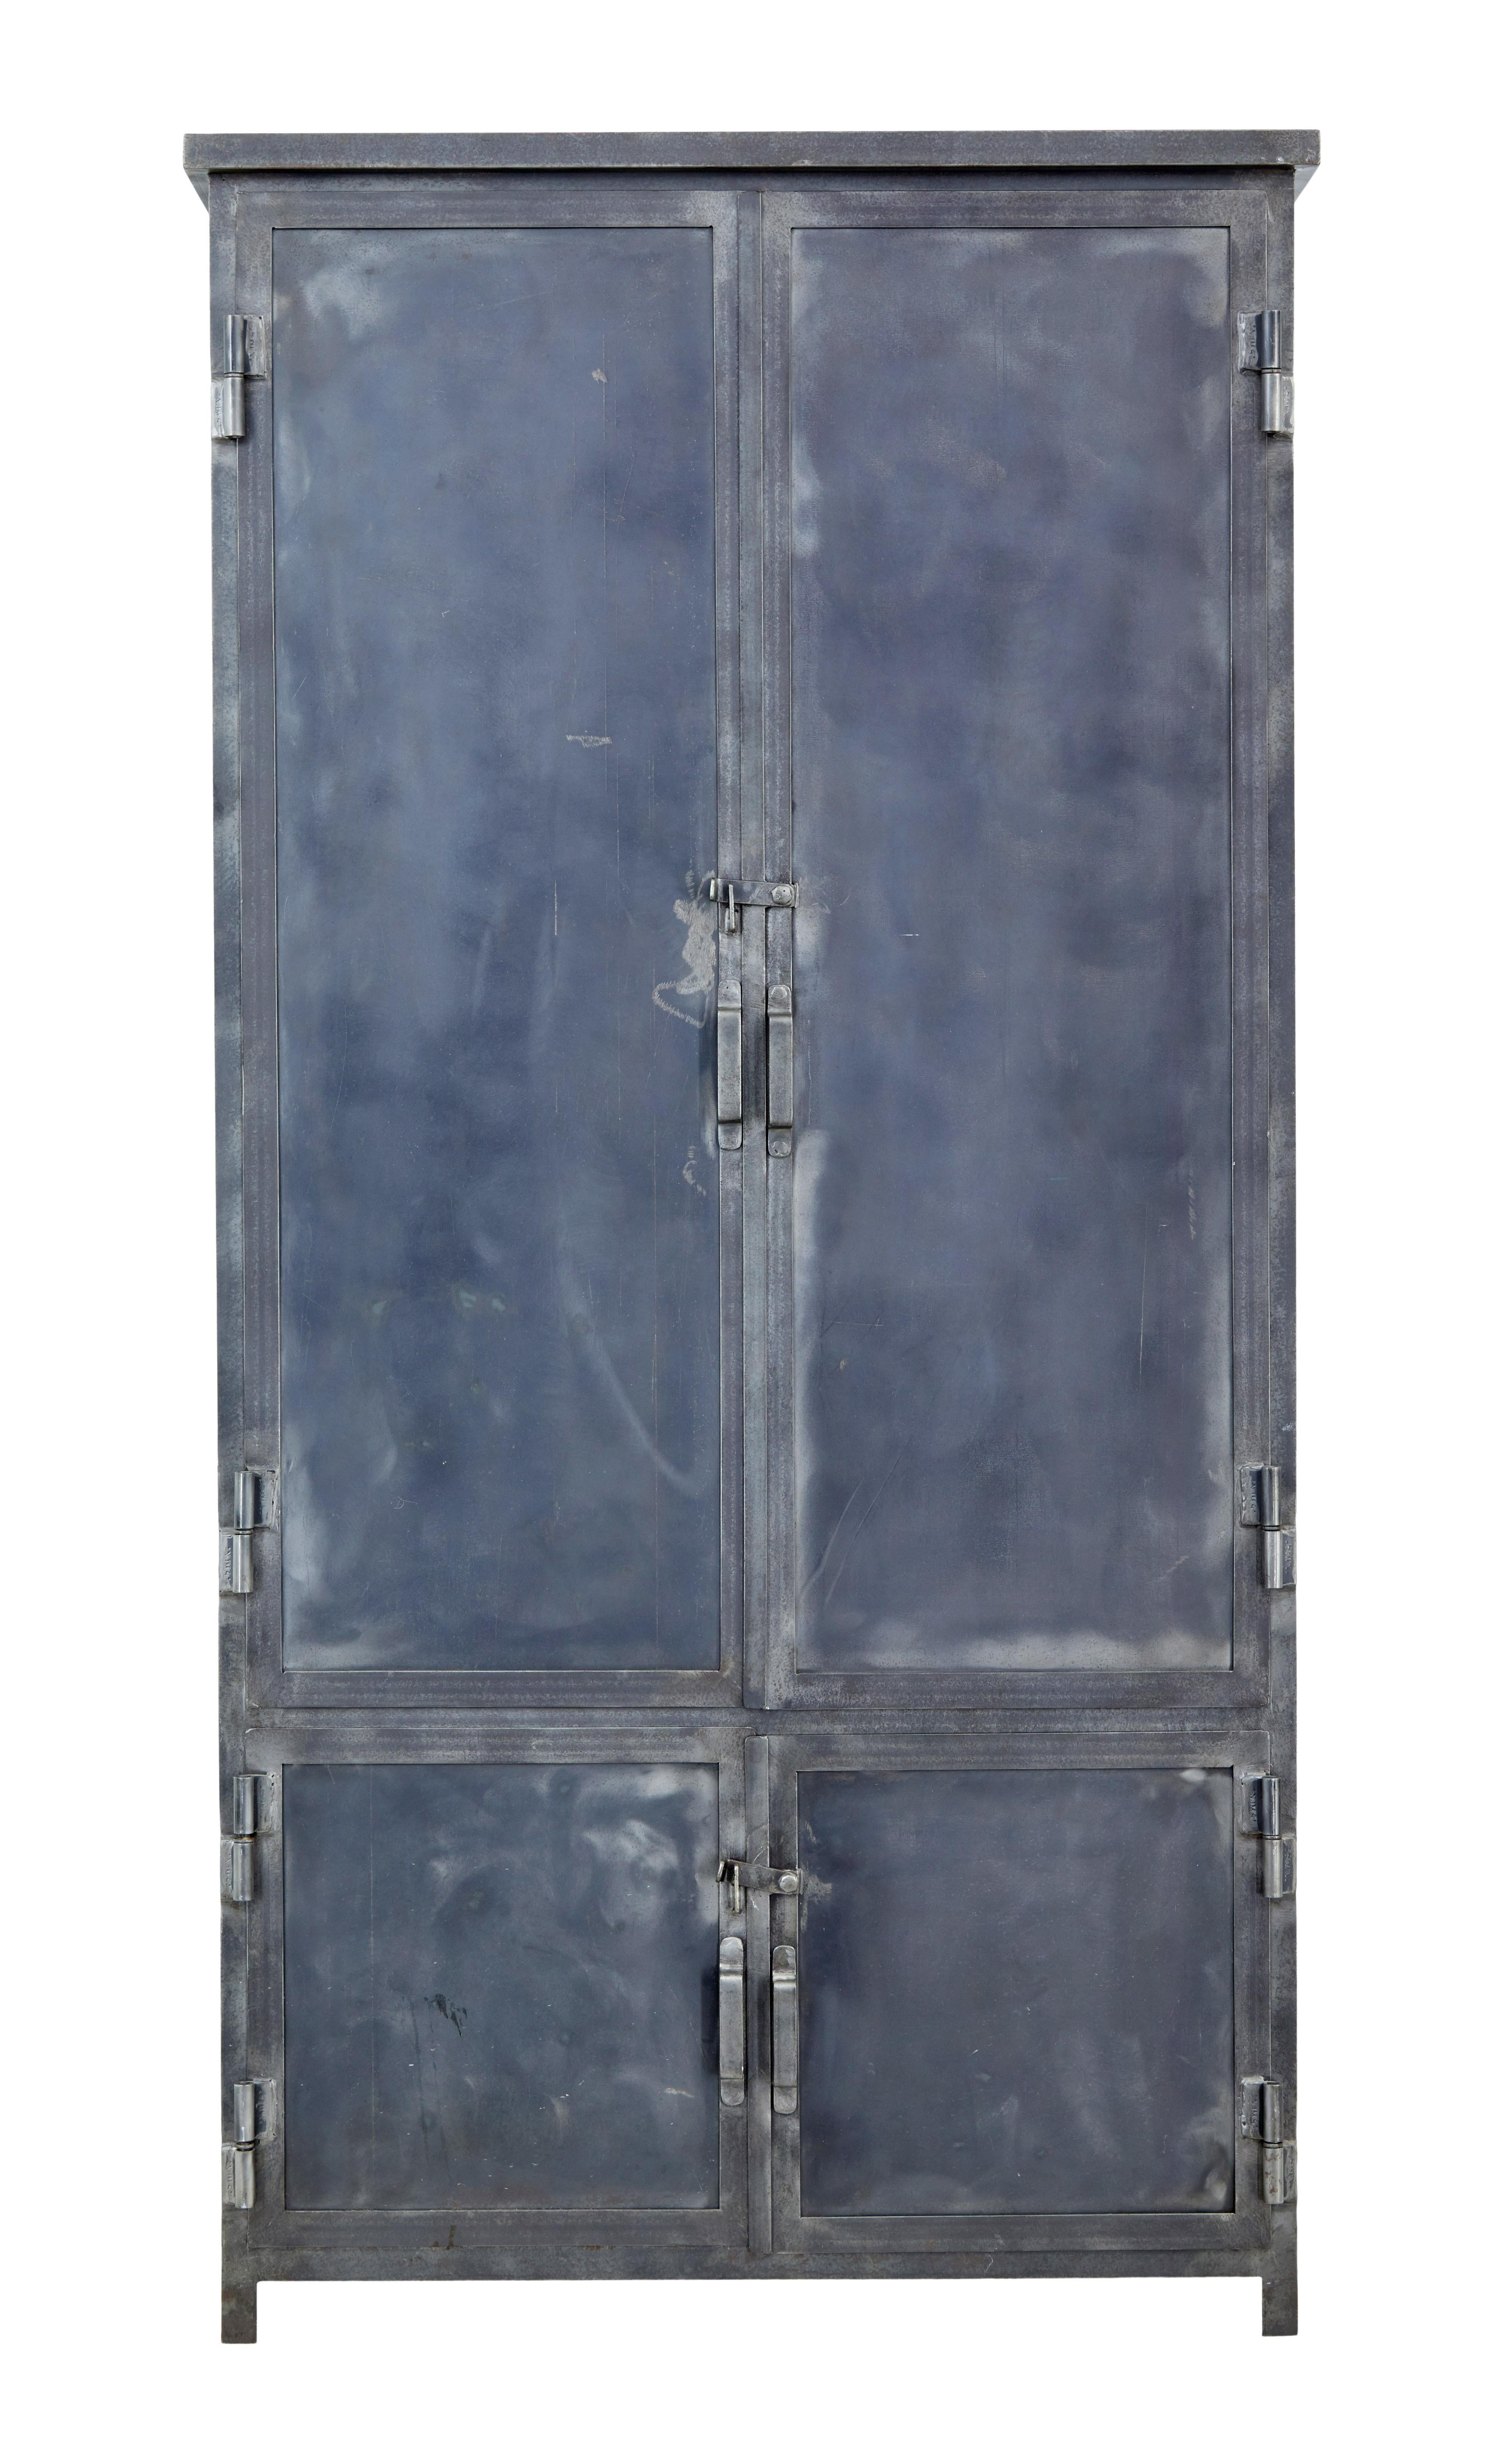 Good quality handmade Industrial inspired steel cabinet circa 1960.

Comprising of a double door cabinet with 2 fixed shelves to the top and a double door smaller cupboard below. Each door fitted with latches and handles. All doors fitted with